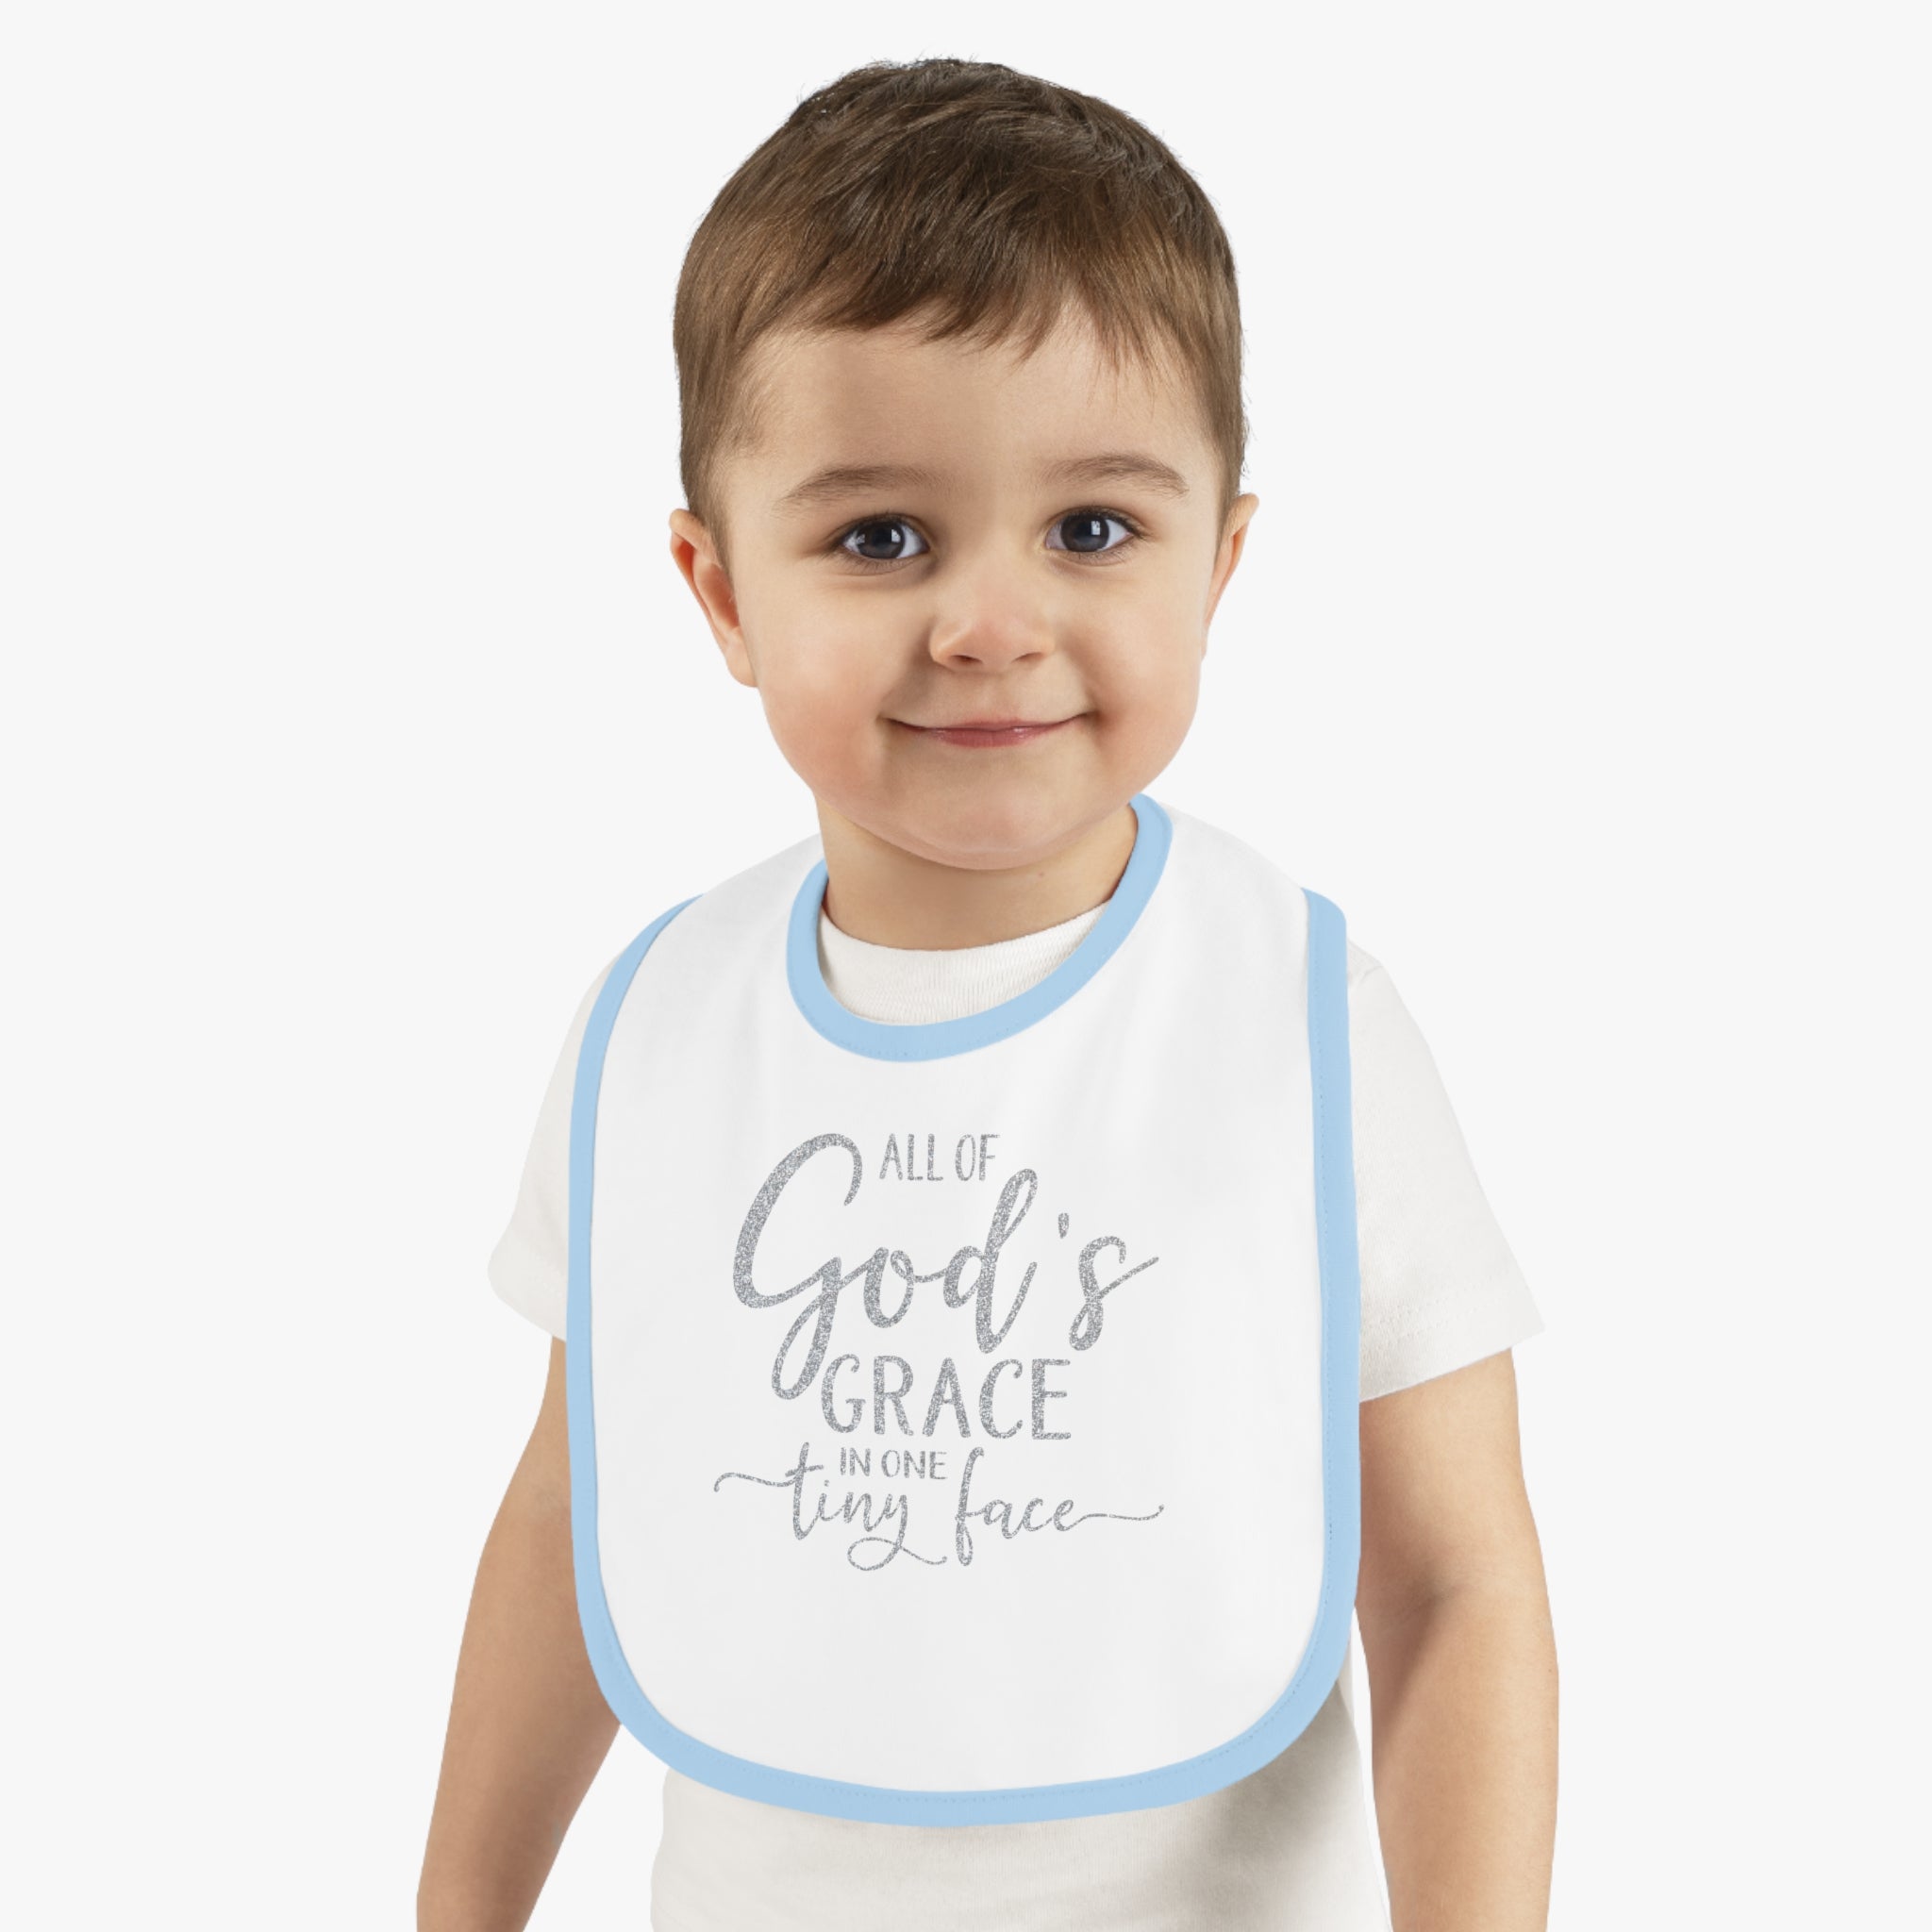 All of God's Grace in One Tiny Face - Silver Glitter Baby Jersey Bib Color: White/Black Size: One size Jesus Passion Apparel